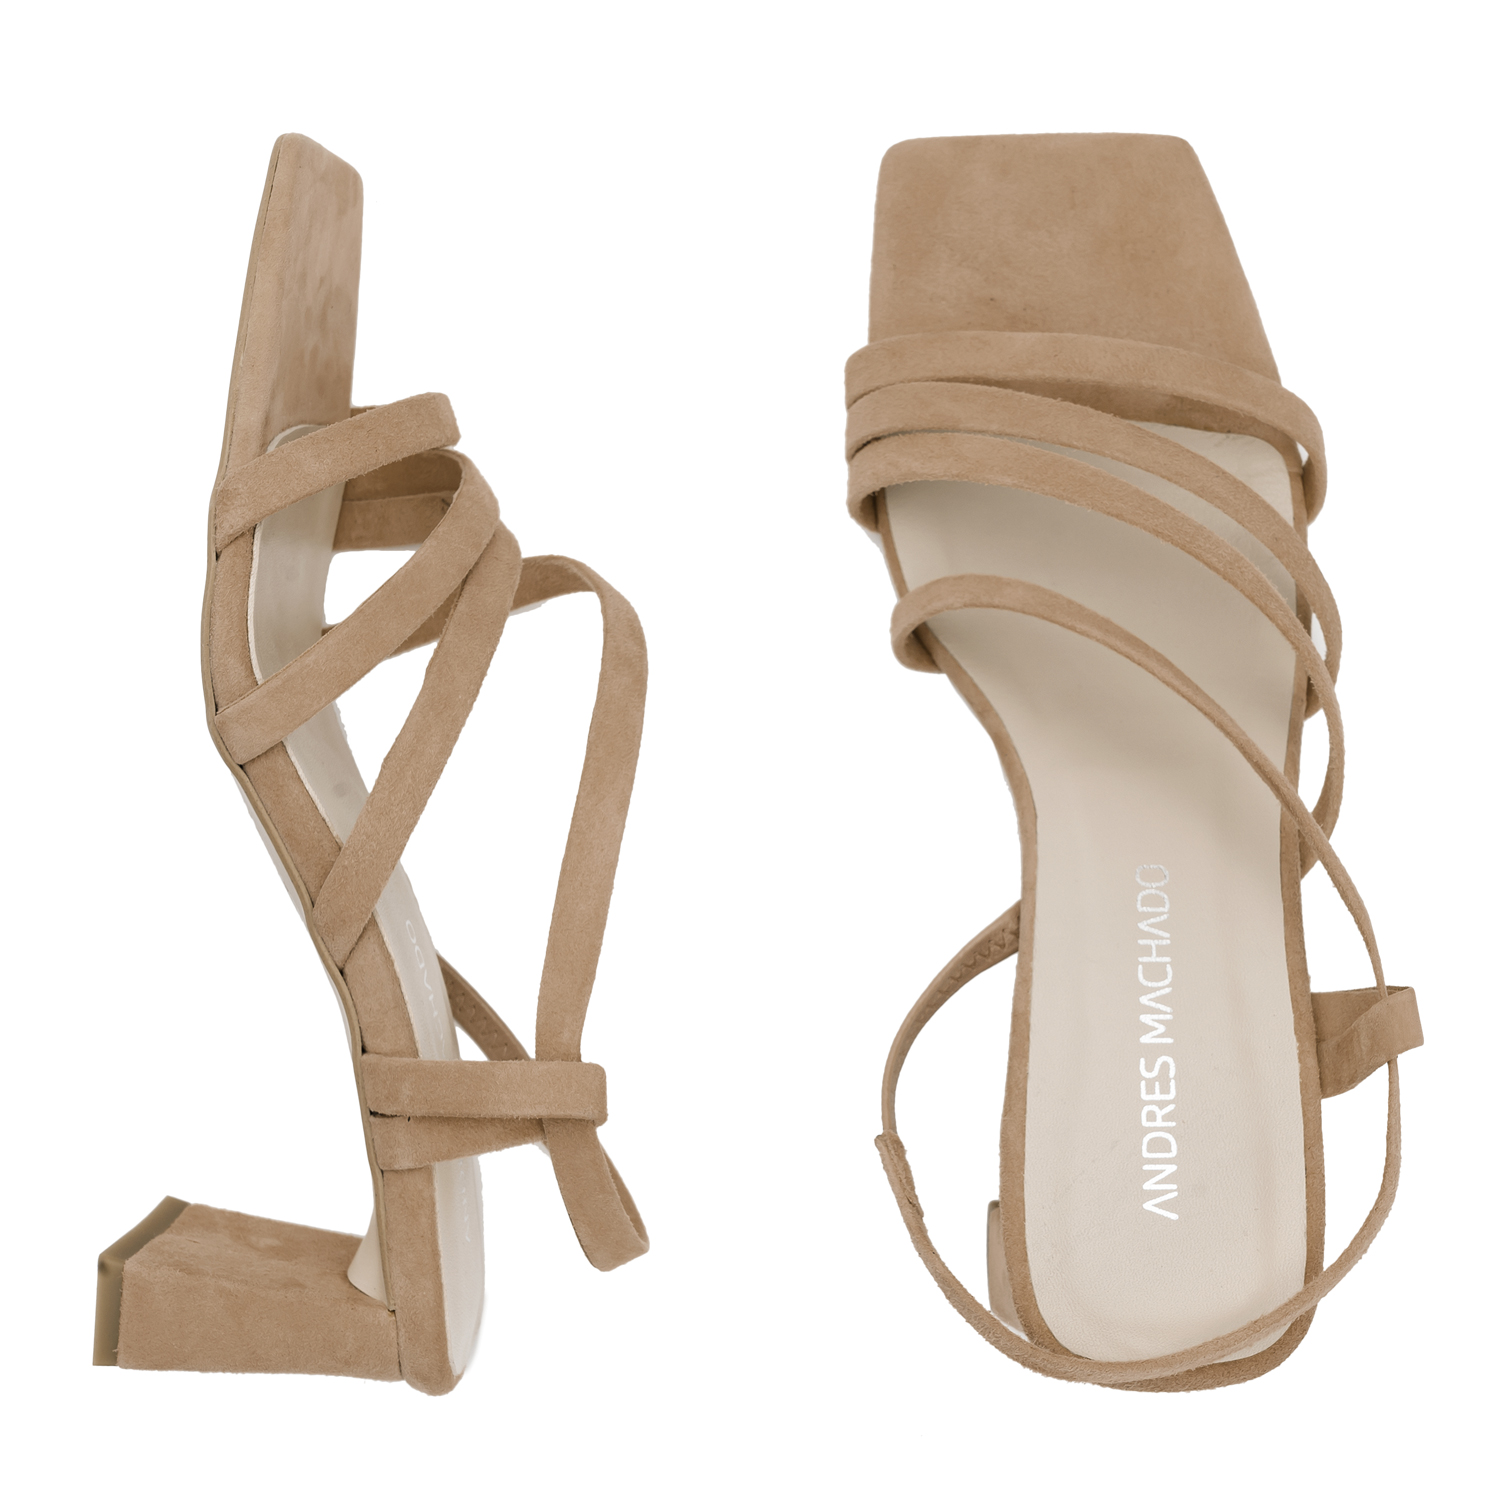 Strapped Sandals in Camel Split Leather and Square Toe 